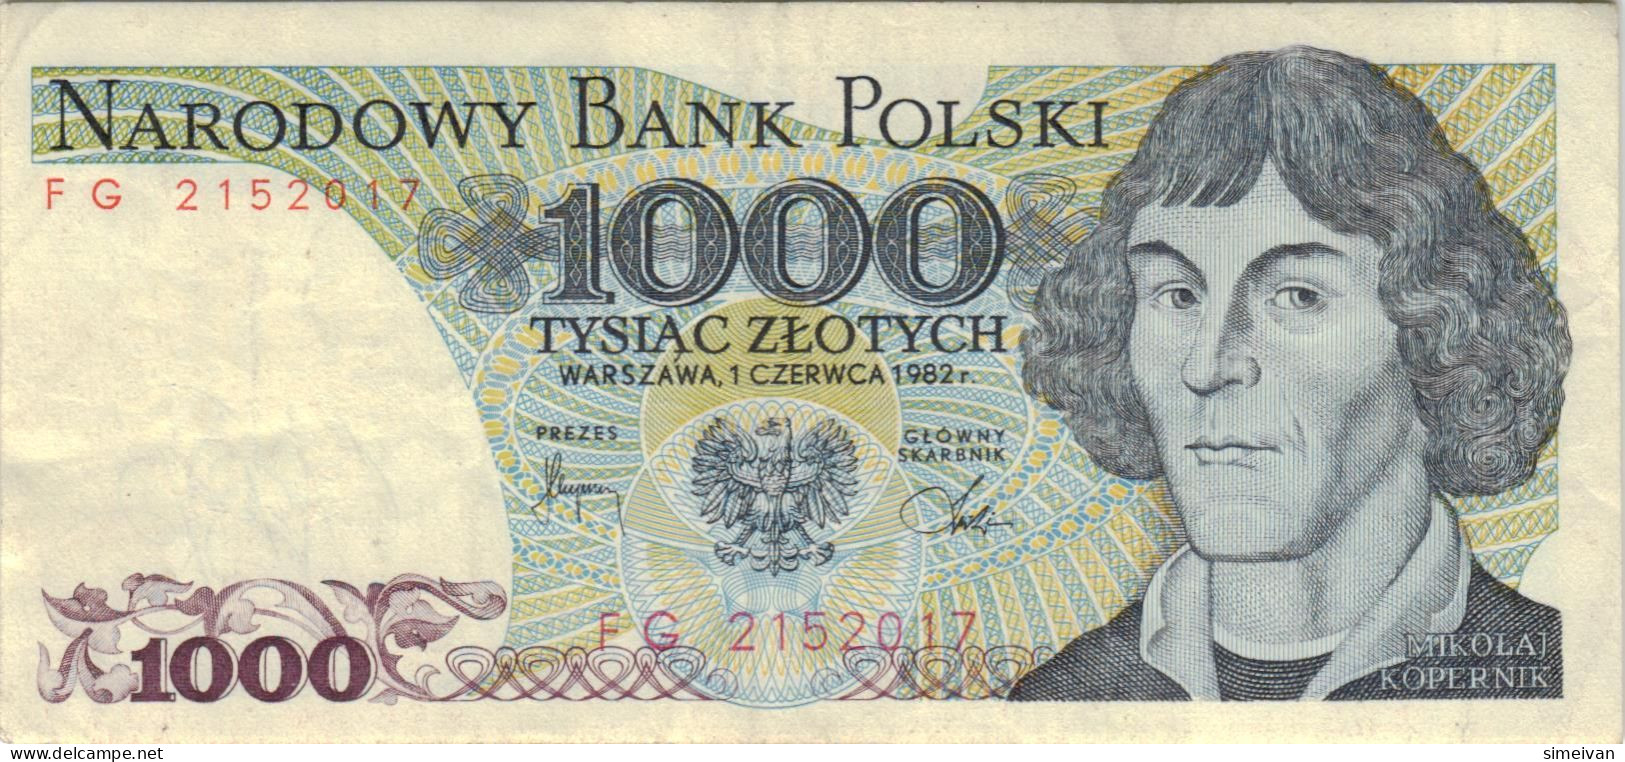 Poland 1000 Zlotych 1975 P-146a Banknote Europe Currency Pologne Polen #5314 - Pologne